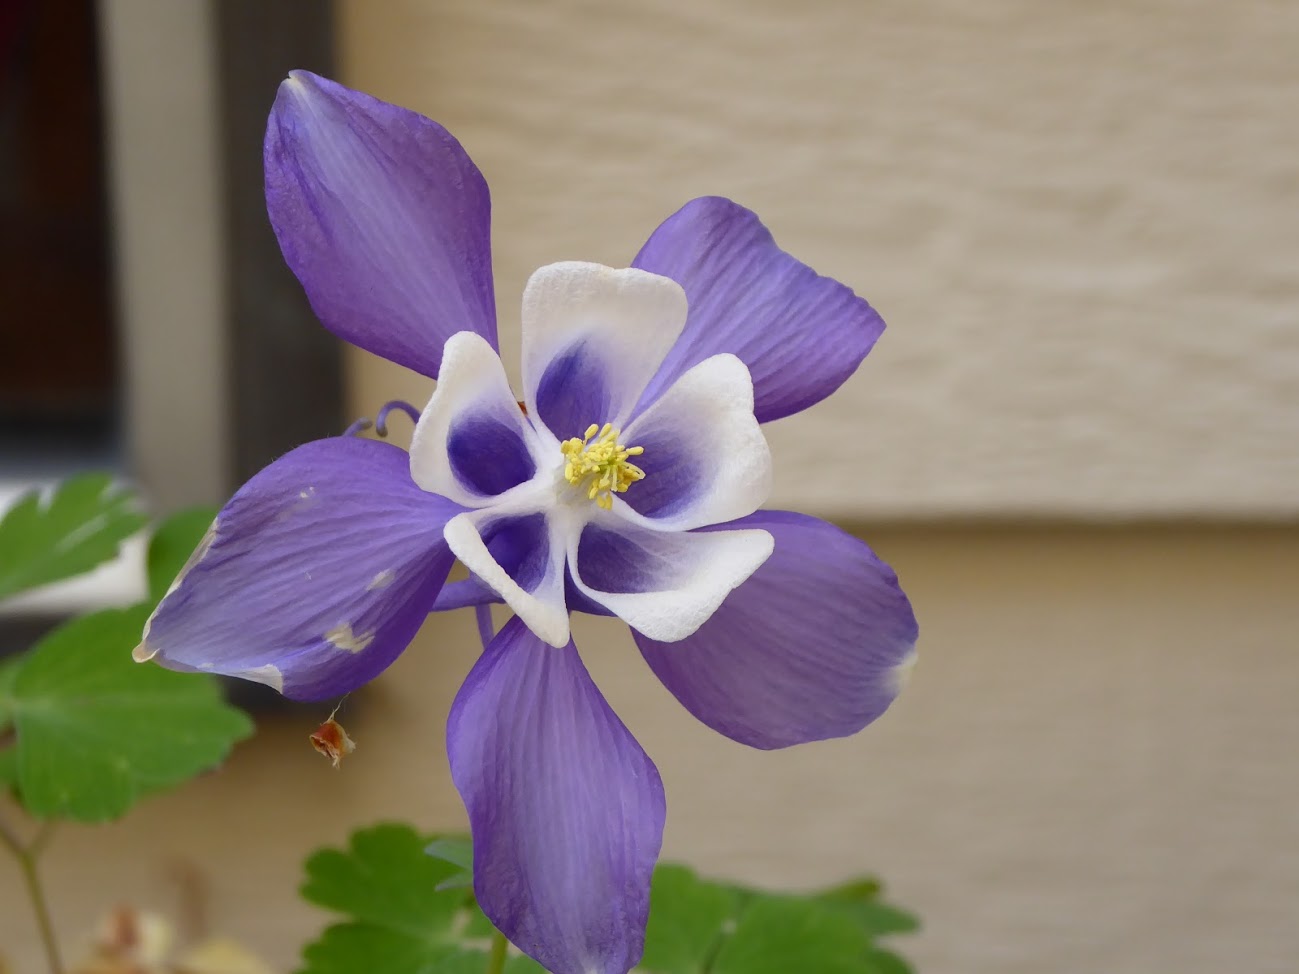 Image of a puple flower